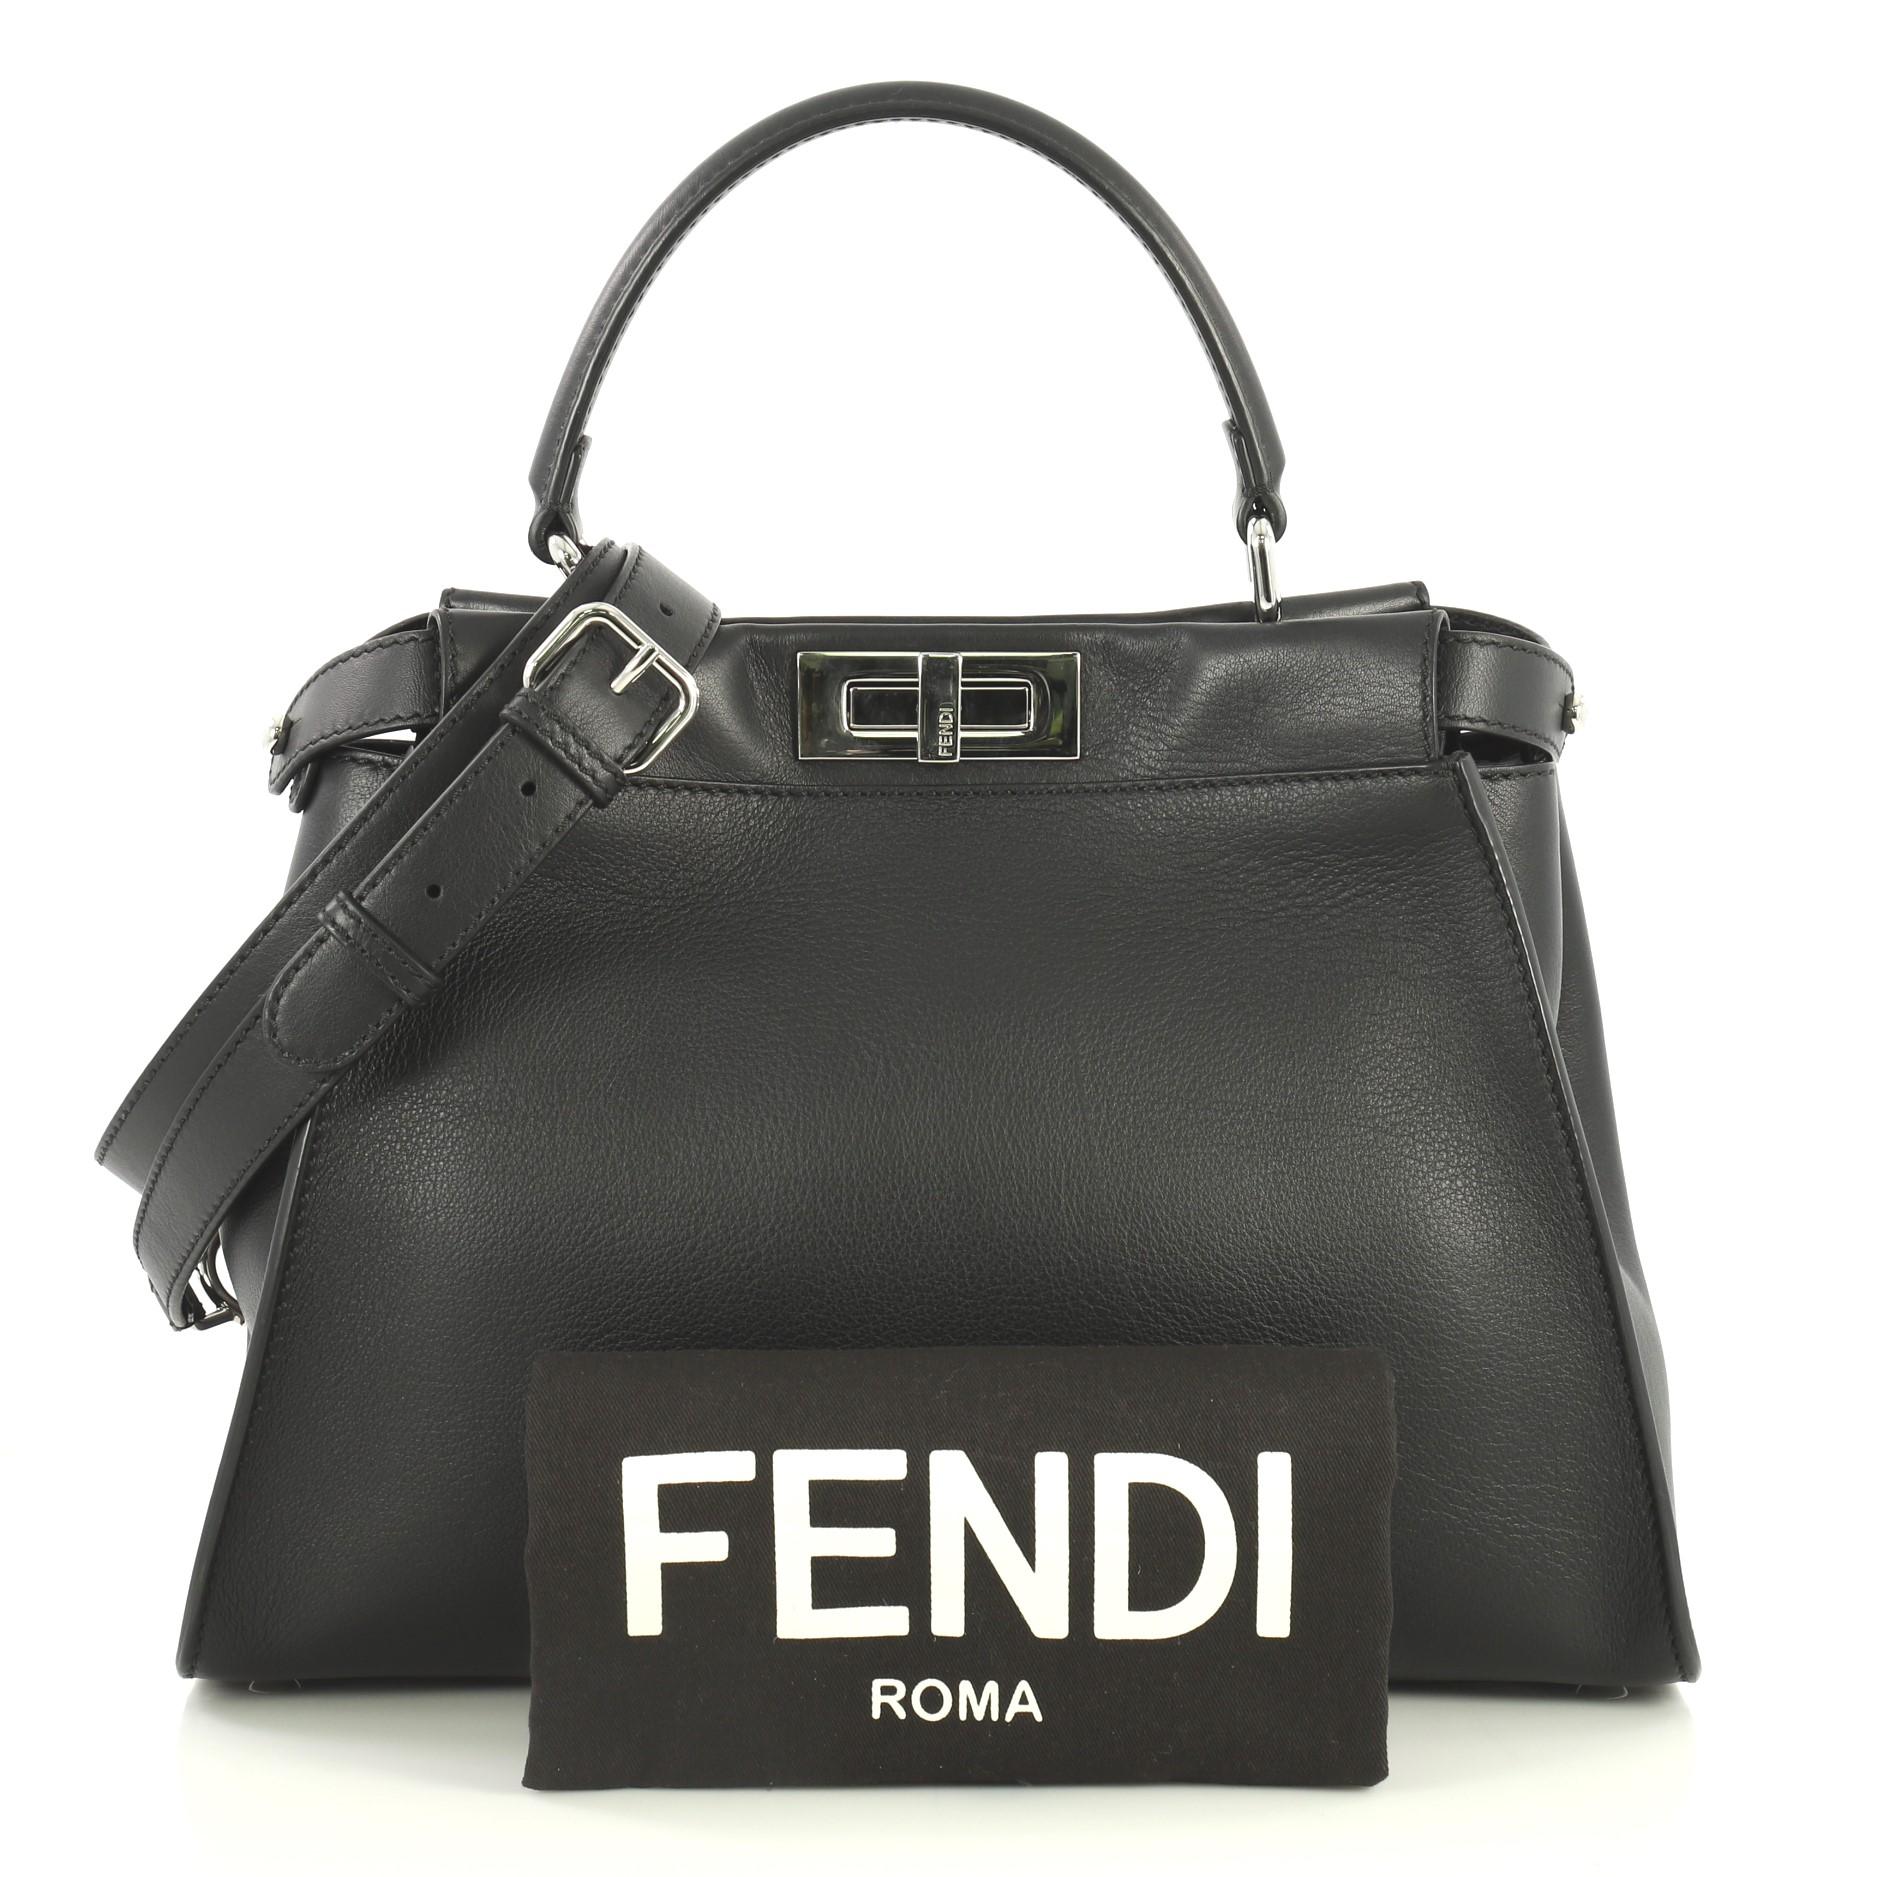 This Fendi Monster Peekaboo Bag Calfskin and Python Regular, crafted from black leather, features its yellow monster eye applique design, short leather top handle, adjustable and detachable crossbody, strap, frame top, protective base studs and